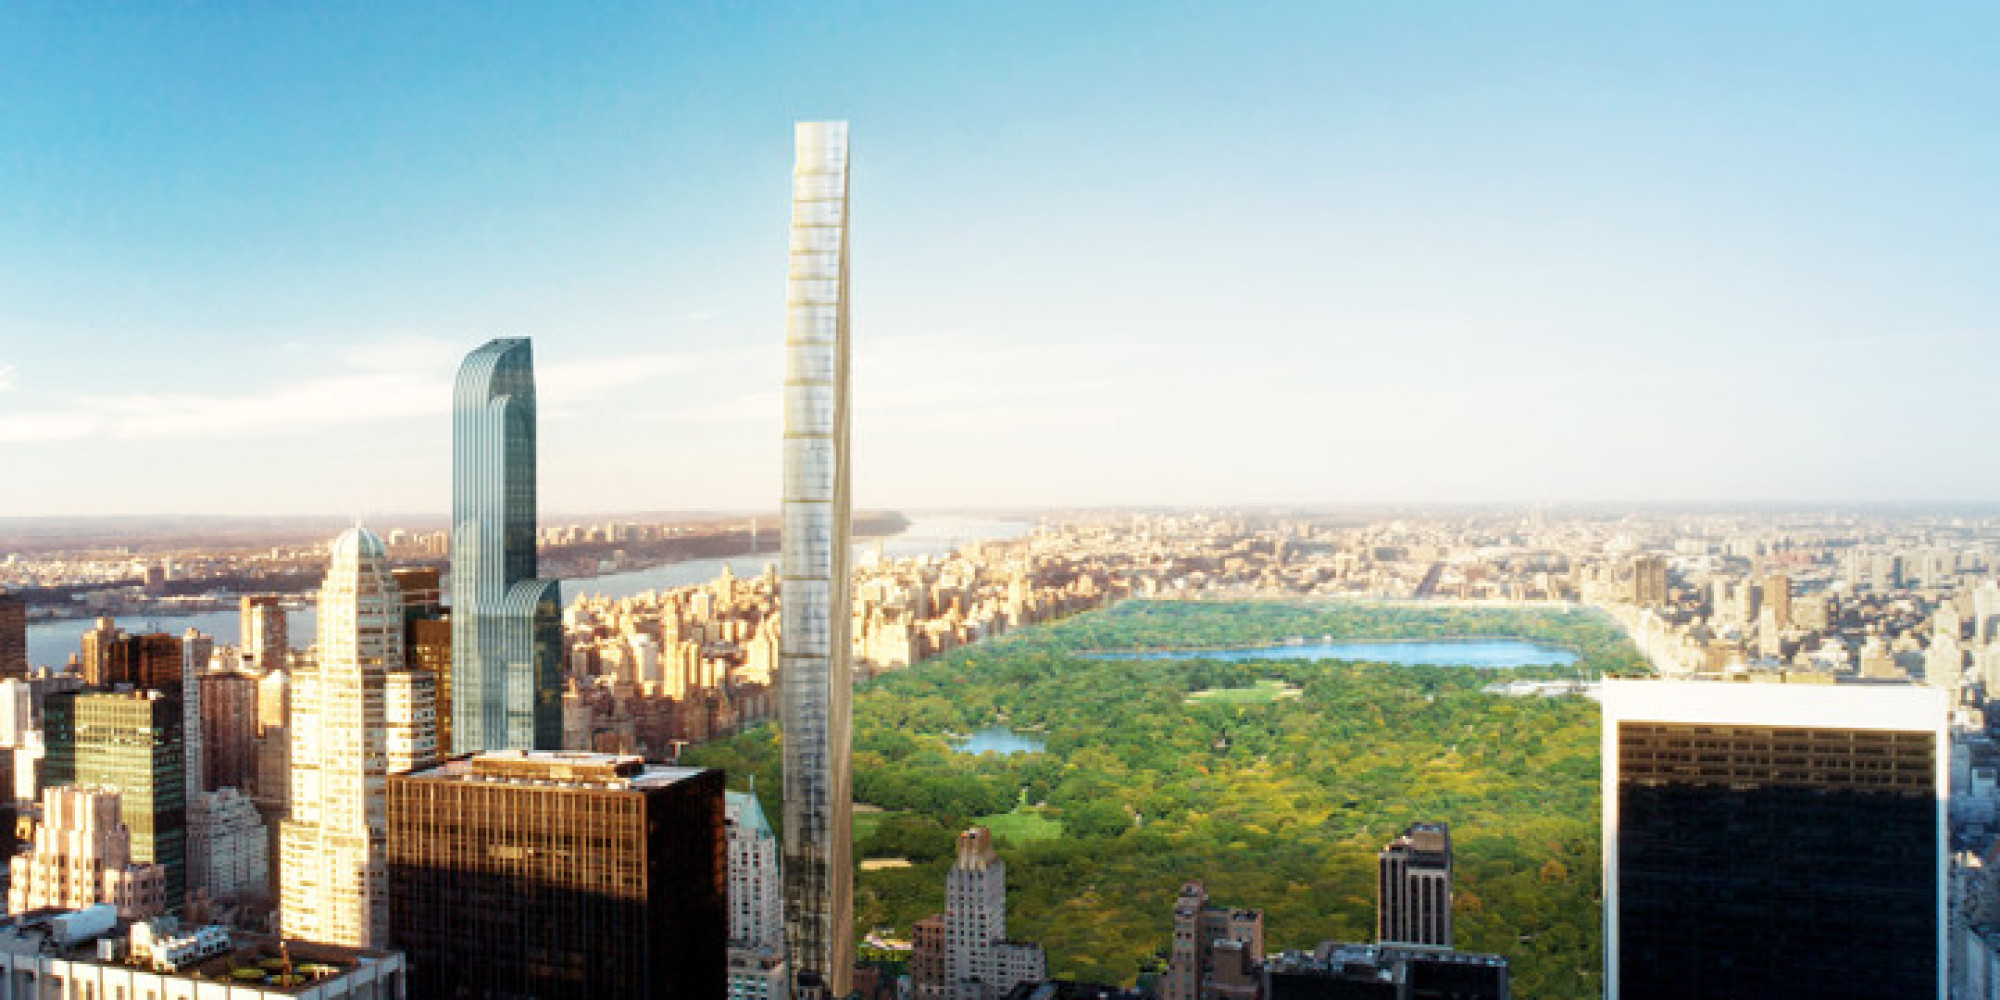 107 West 57th Street New York Tower Could Be The Skinniest Skyscraper Yet (PICTURES ...2000 x 1000